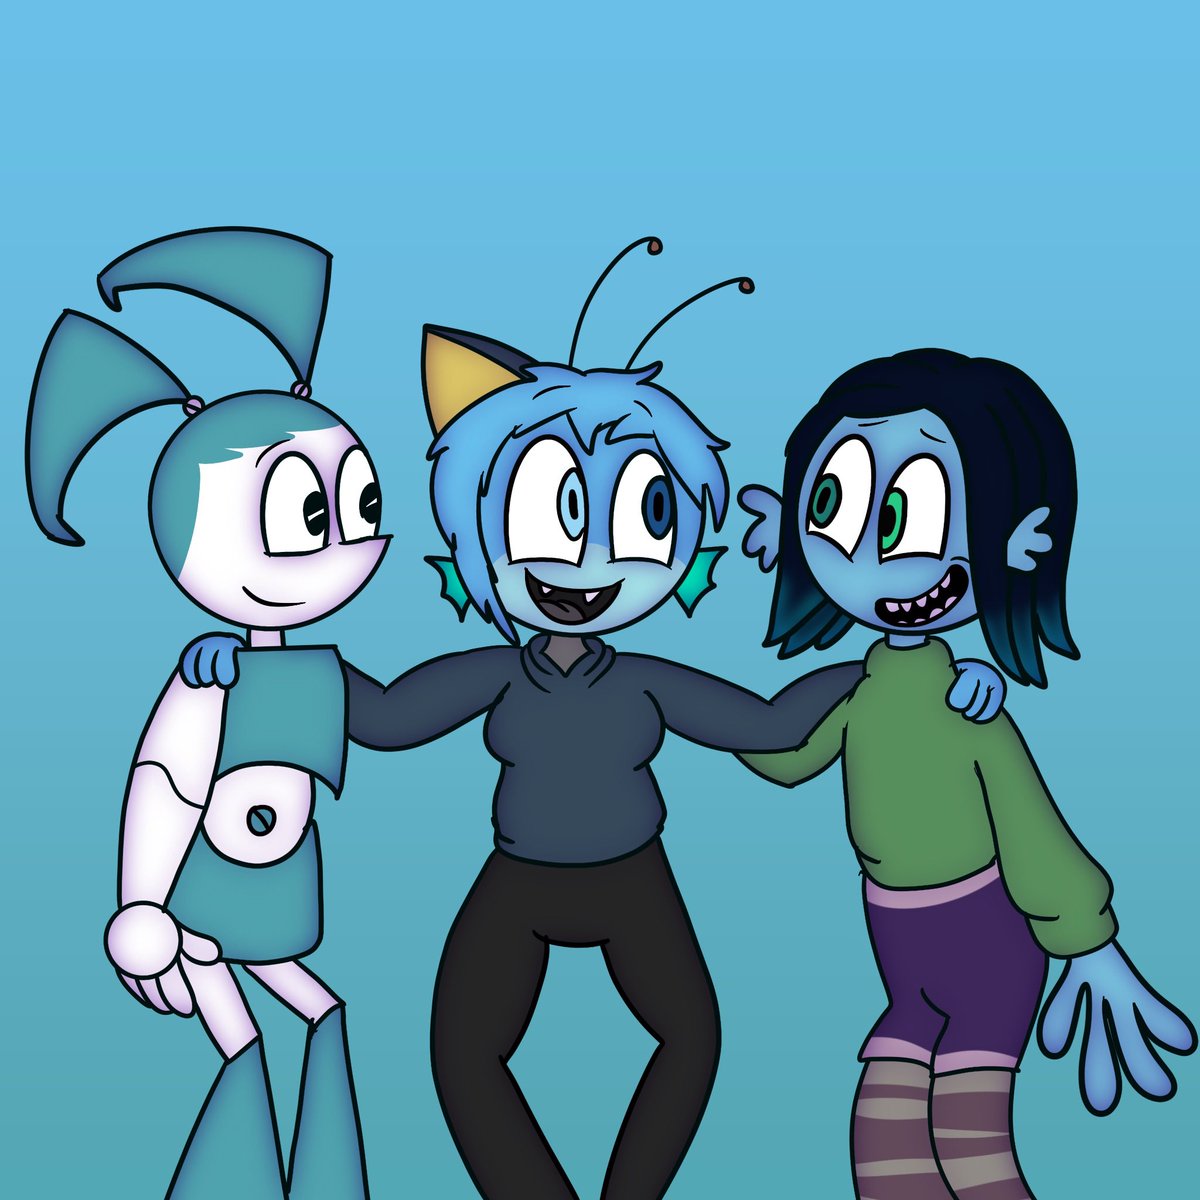 Since people compare my oc with ruby and jenny. I thought to draw the trio together 

#RubygillmanTeenageKraken #RGTK #Dreamworks #Mlaatr #Mylifeasateenagerobot #Oc #OriginalCharacter #Procreate